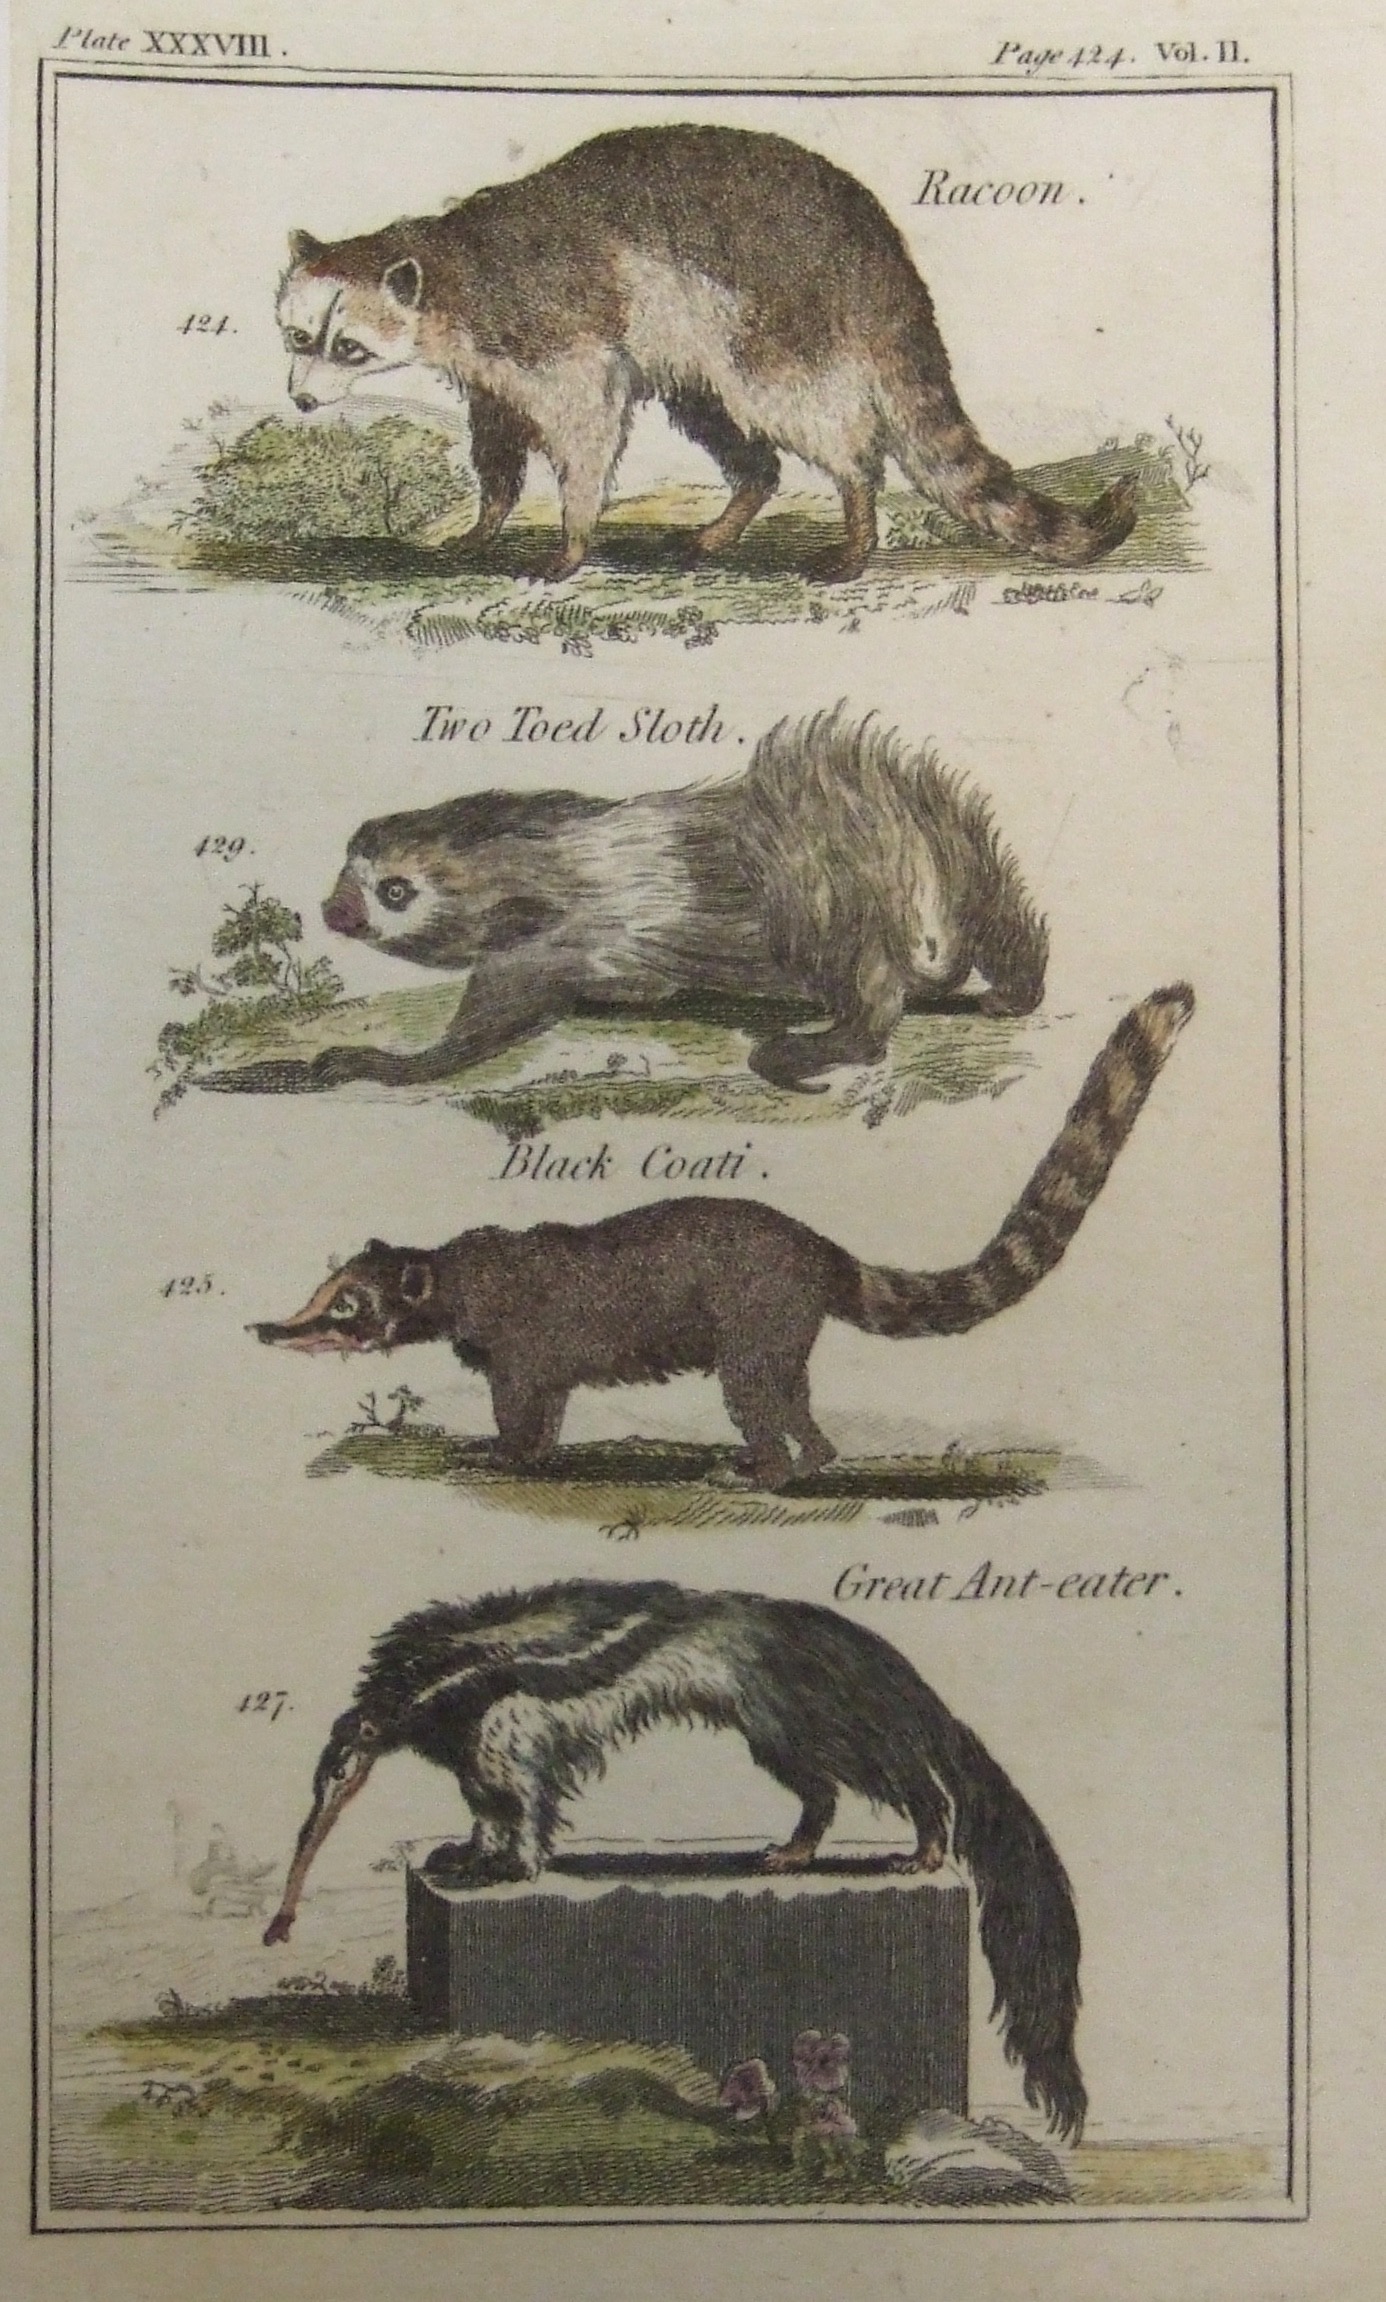 Racoon, Two Toed Sloth, Black Coati, Great Ant Eater